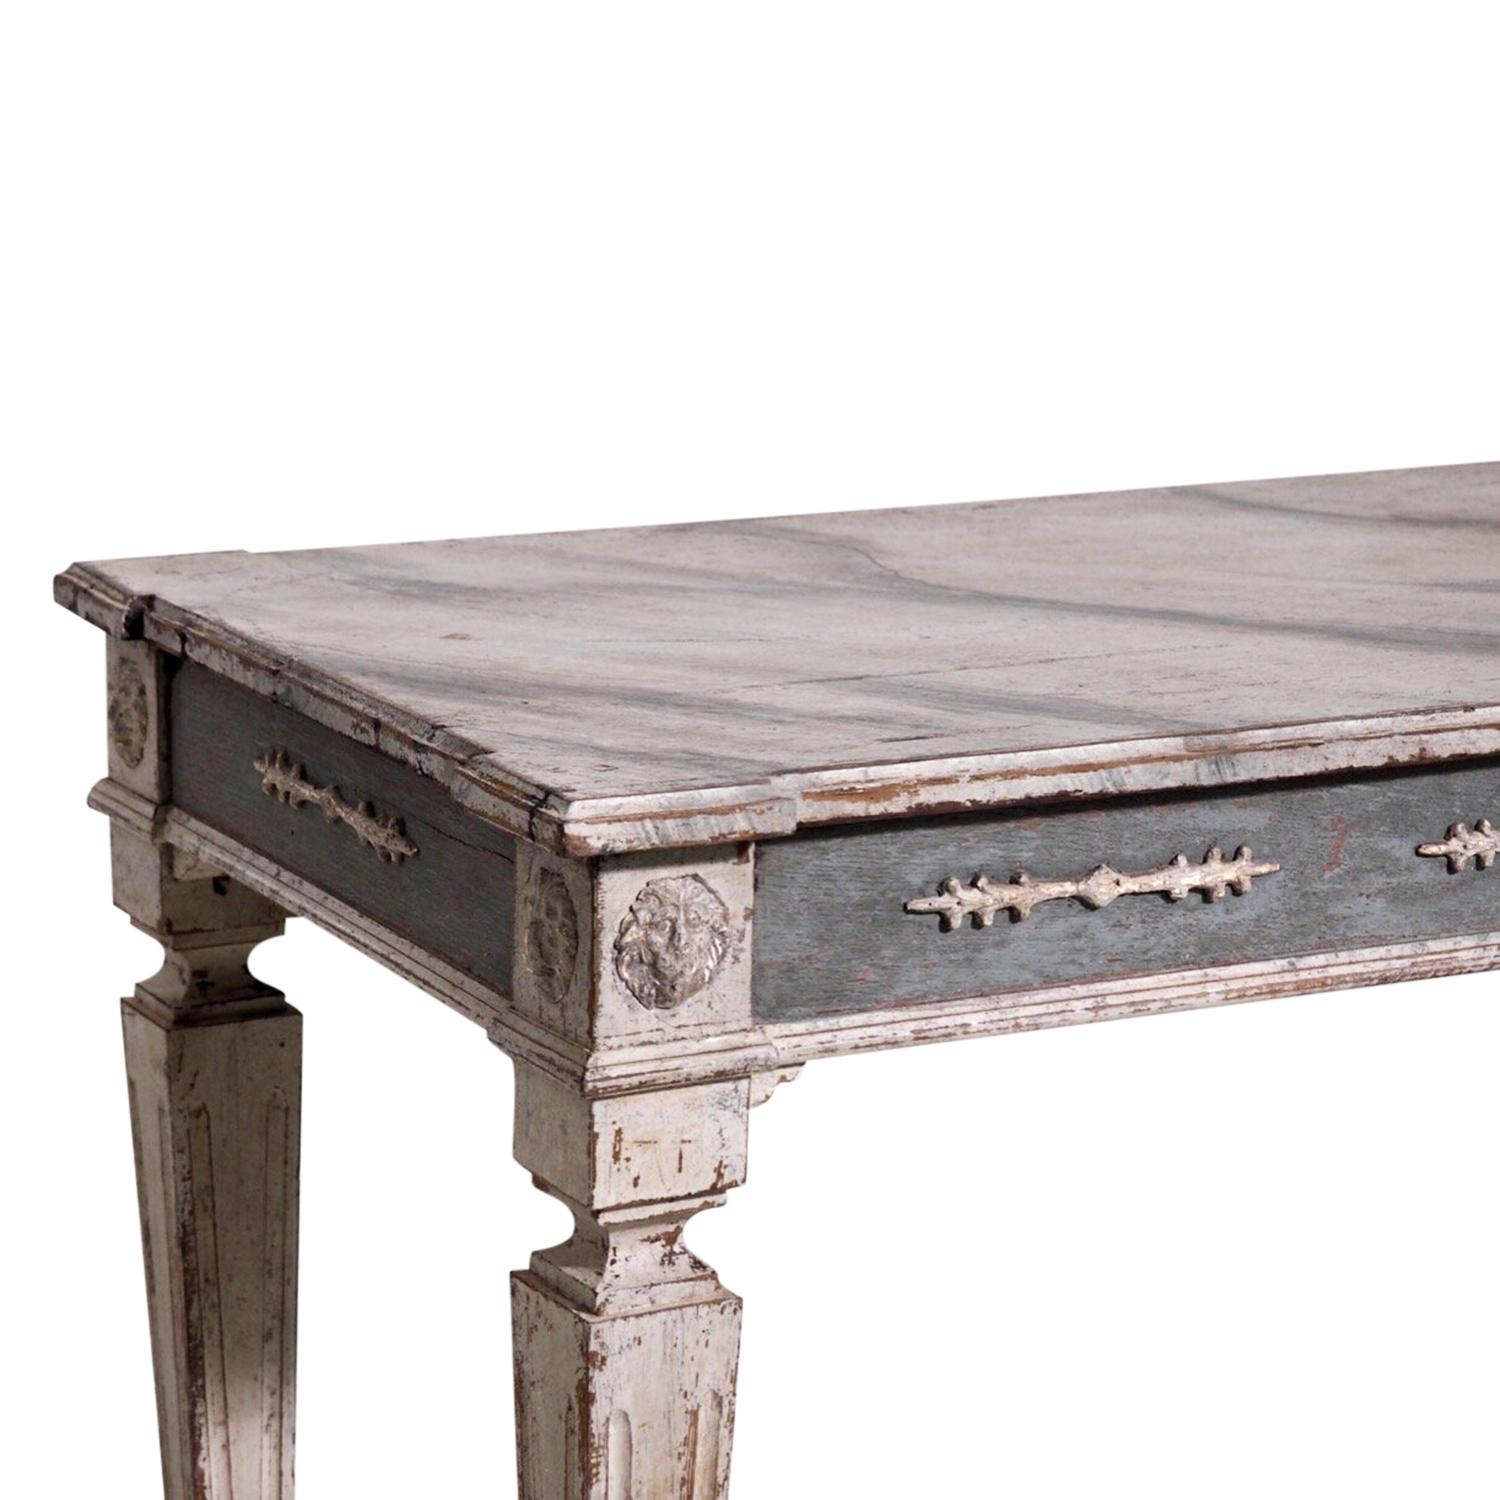 A dark-grey, antique Swedish Gustavian console table with a painted faux marble top, made of hand crafted Pinewood, in good condition. The Scandinavian wood end table is standing four straight, square legs, enhanced by detailed flower carvings,